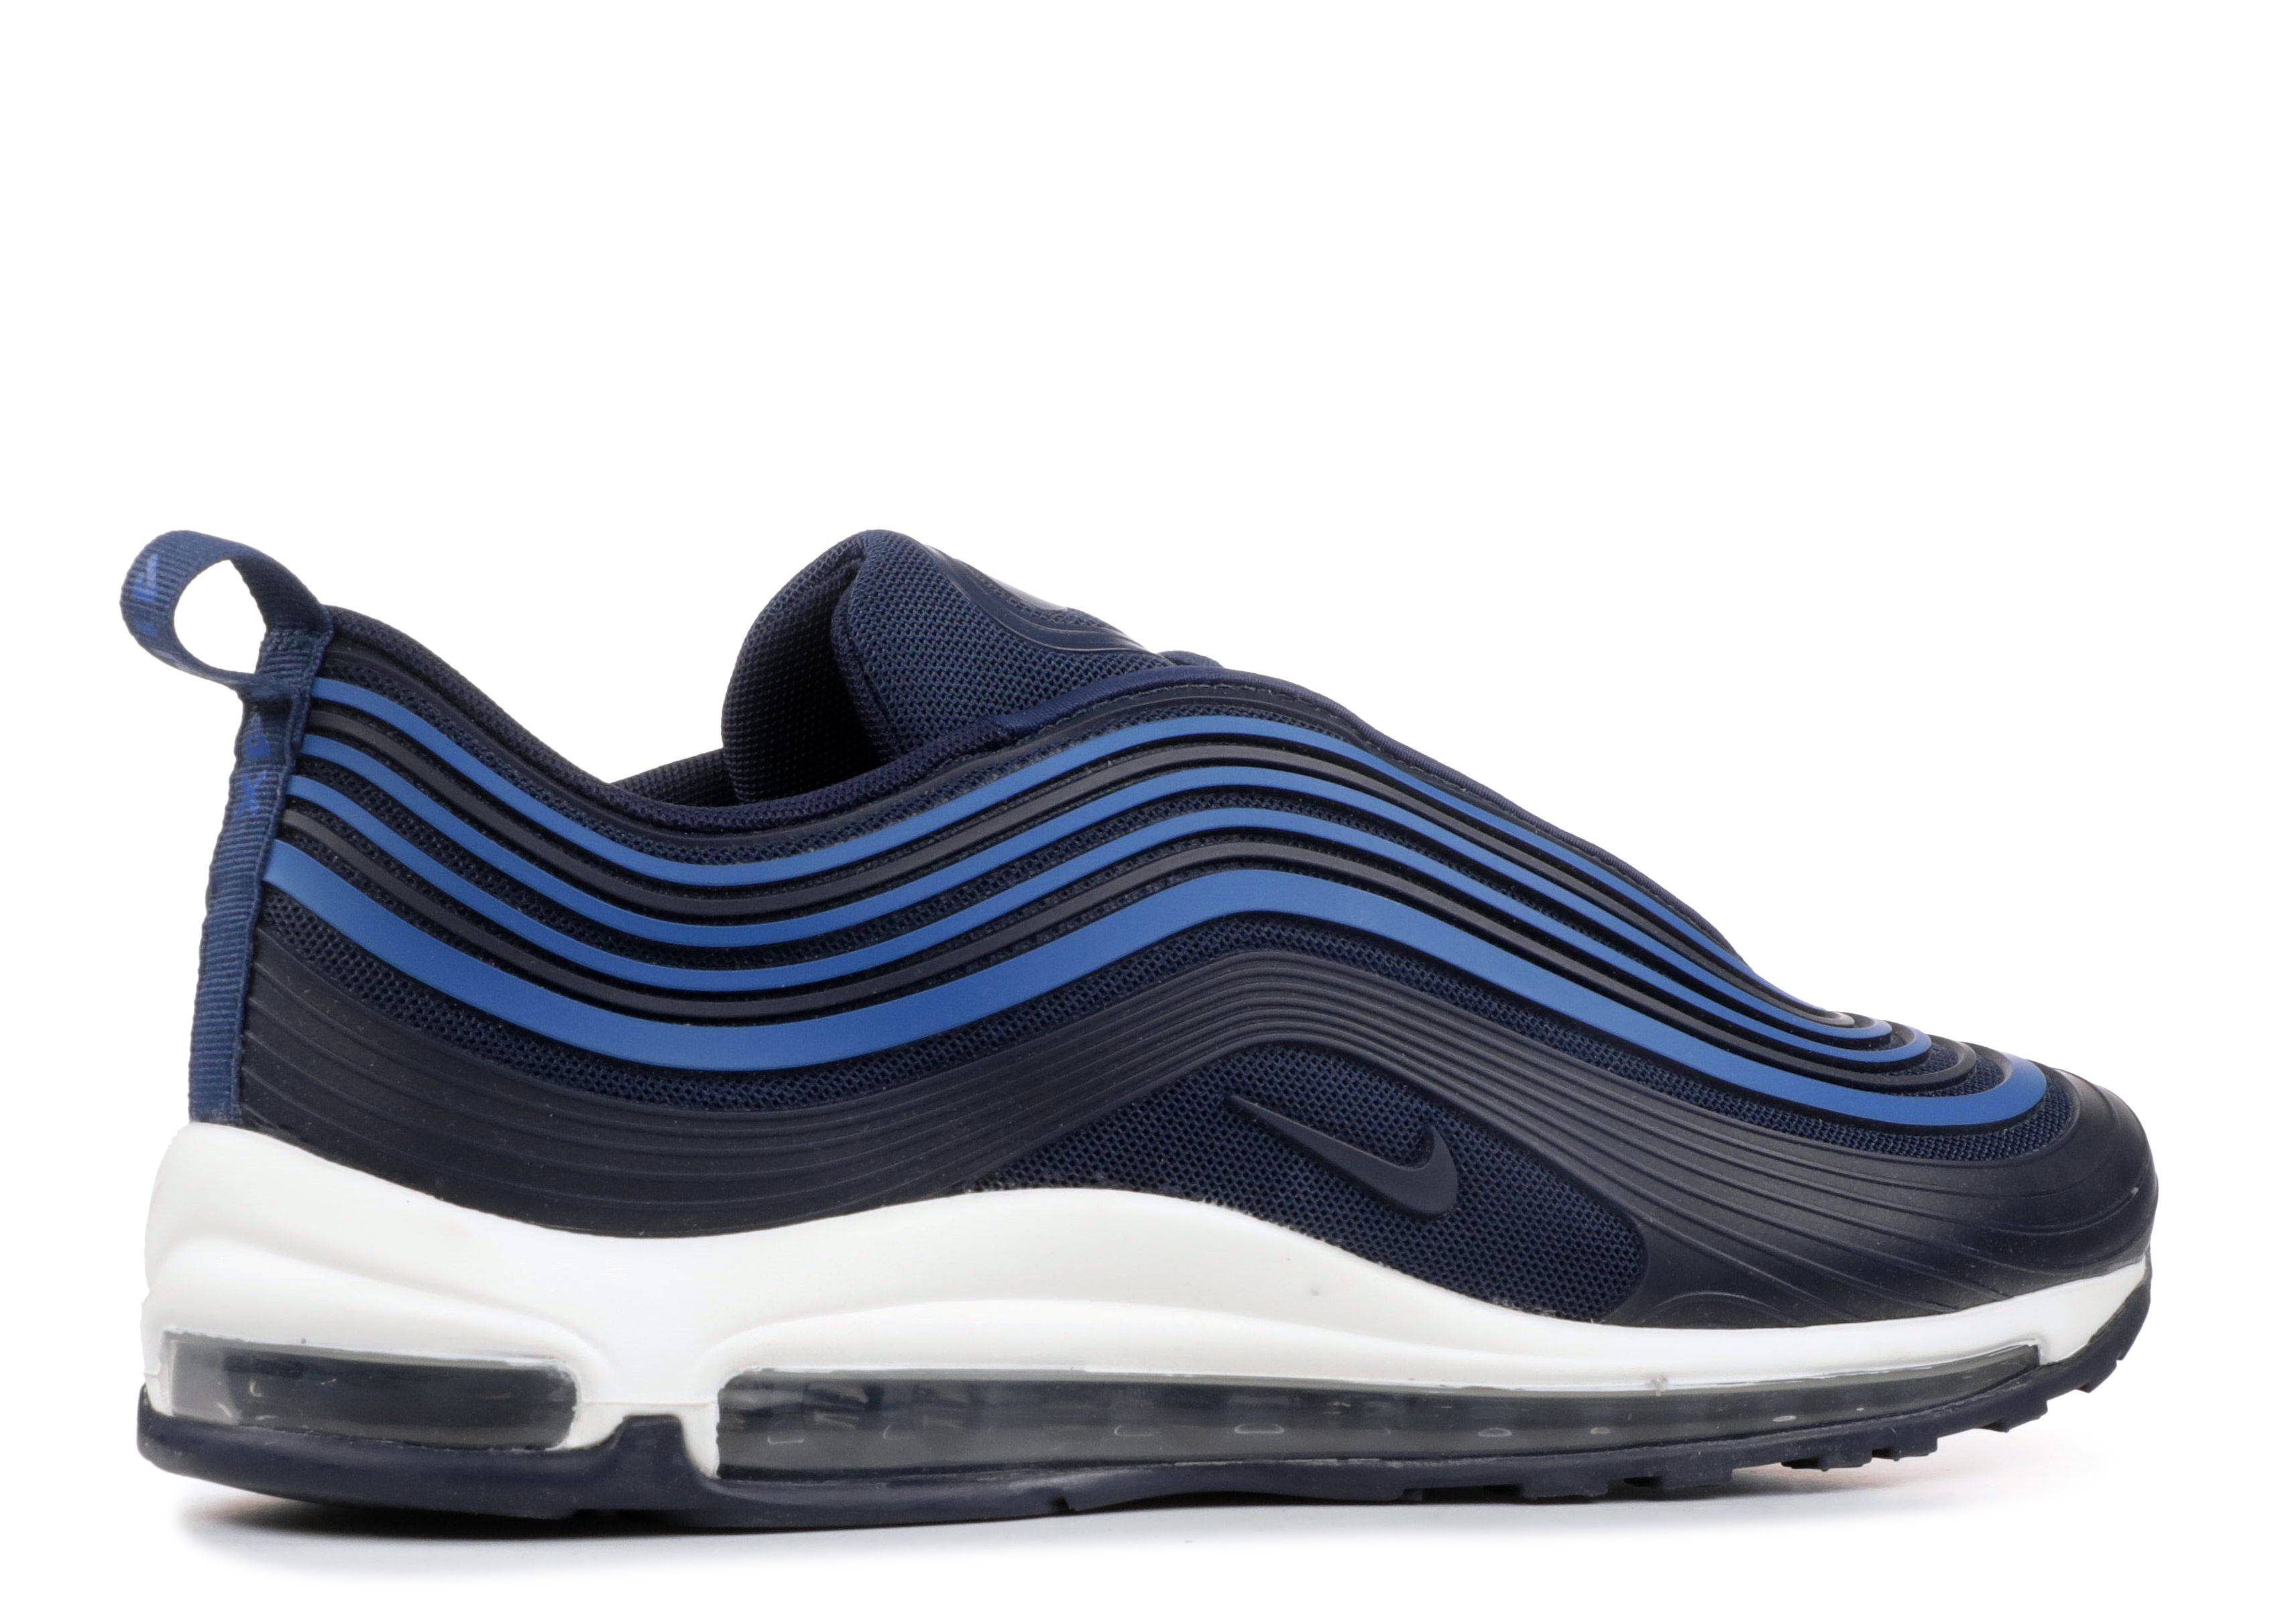 N1k3 Air Max 97 Ultra ’17 ‘Gym Blue Obsidian’ AH7581-400 Shoes Mens Shoes Sneakers & Athletic Shoes 